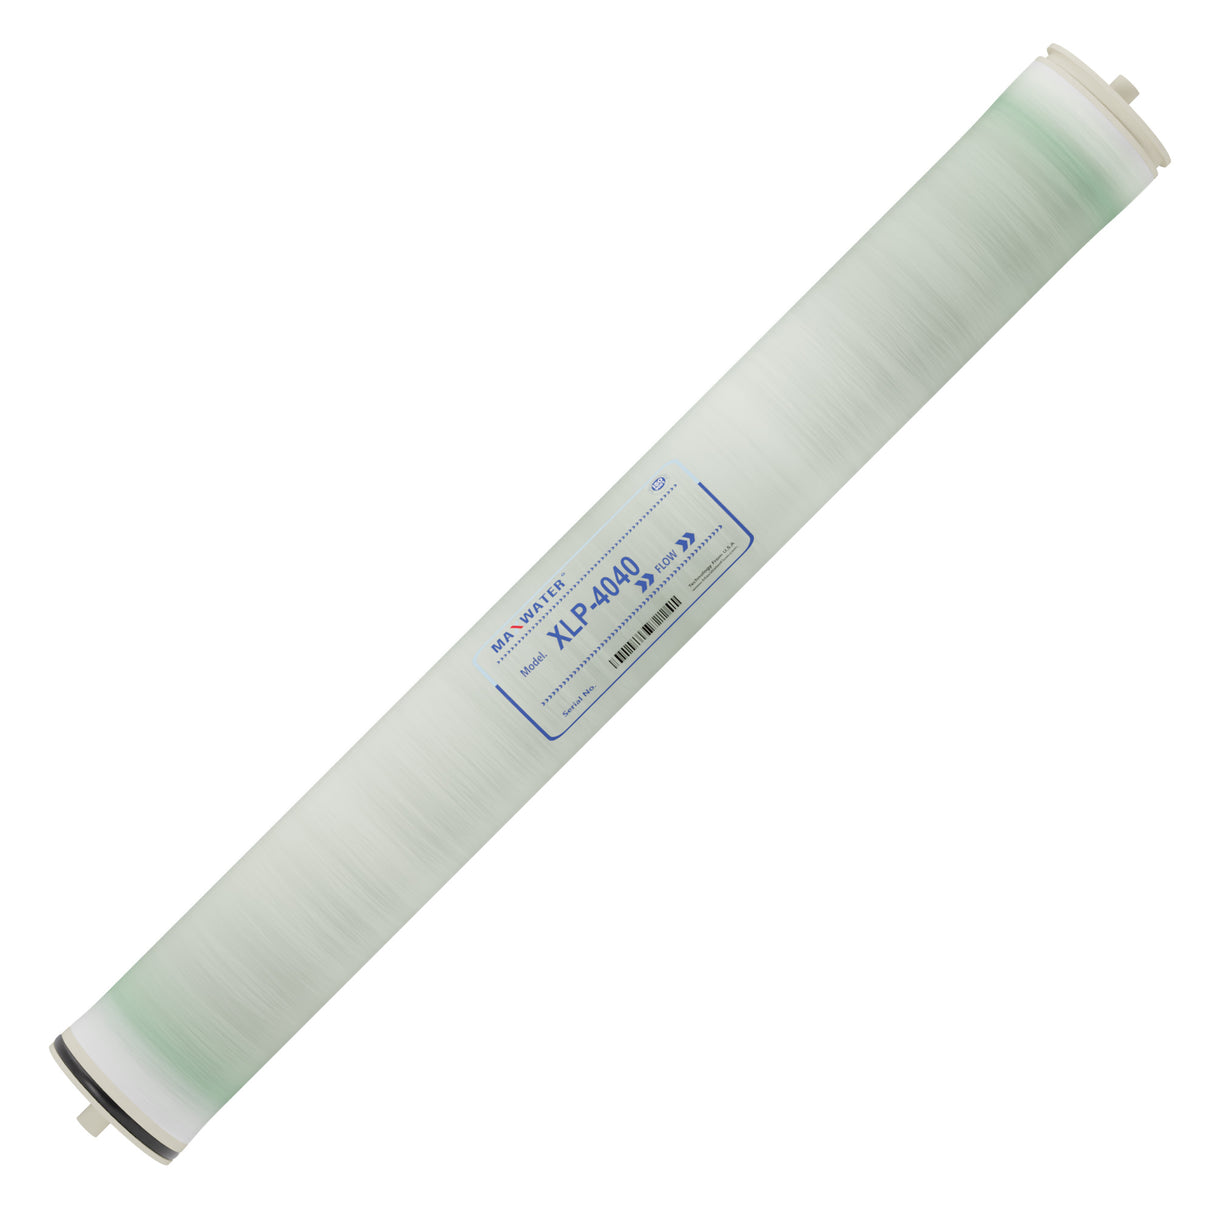 XLP variant 4x40-inch RO membrane - ideal for low-pressure water filtration in commercial settings